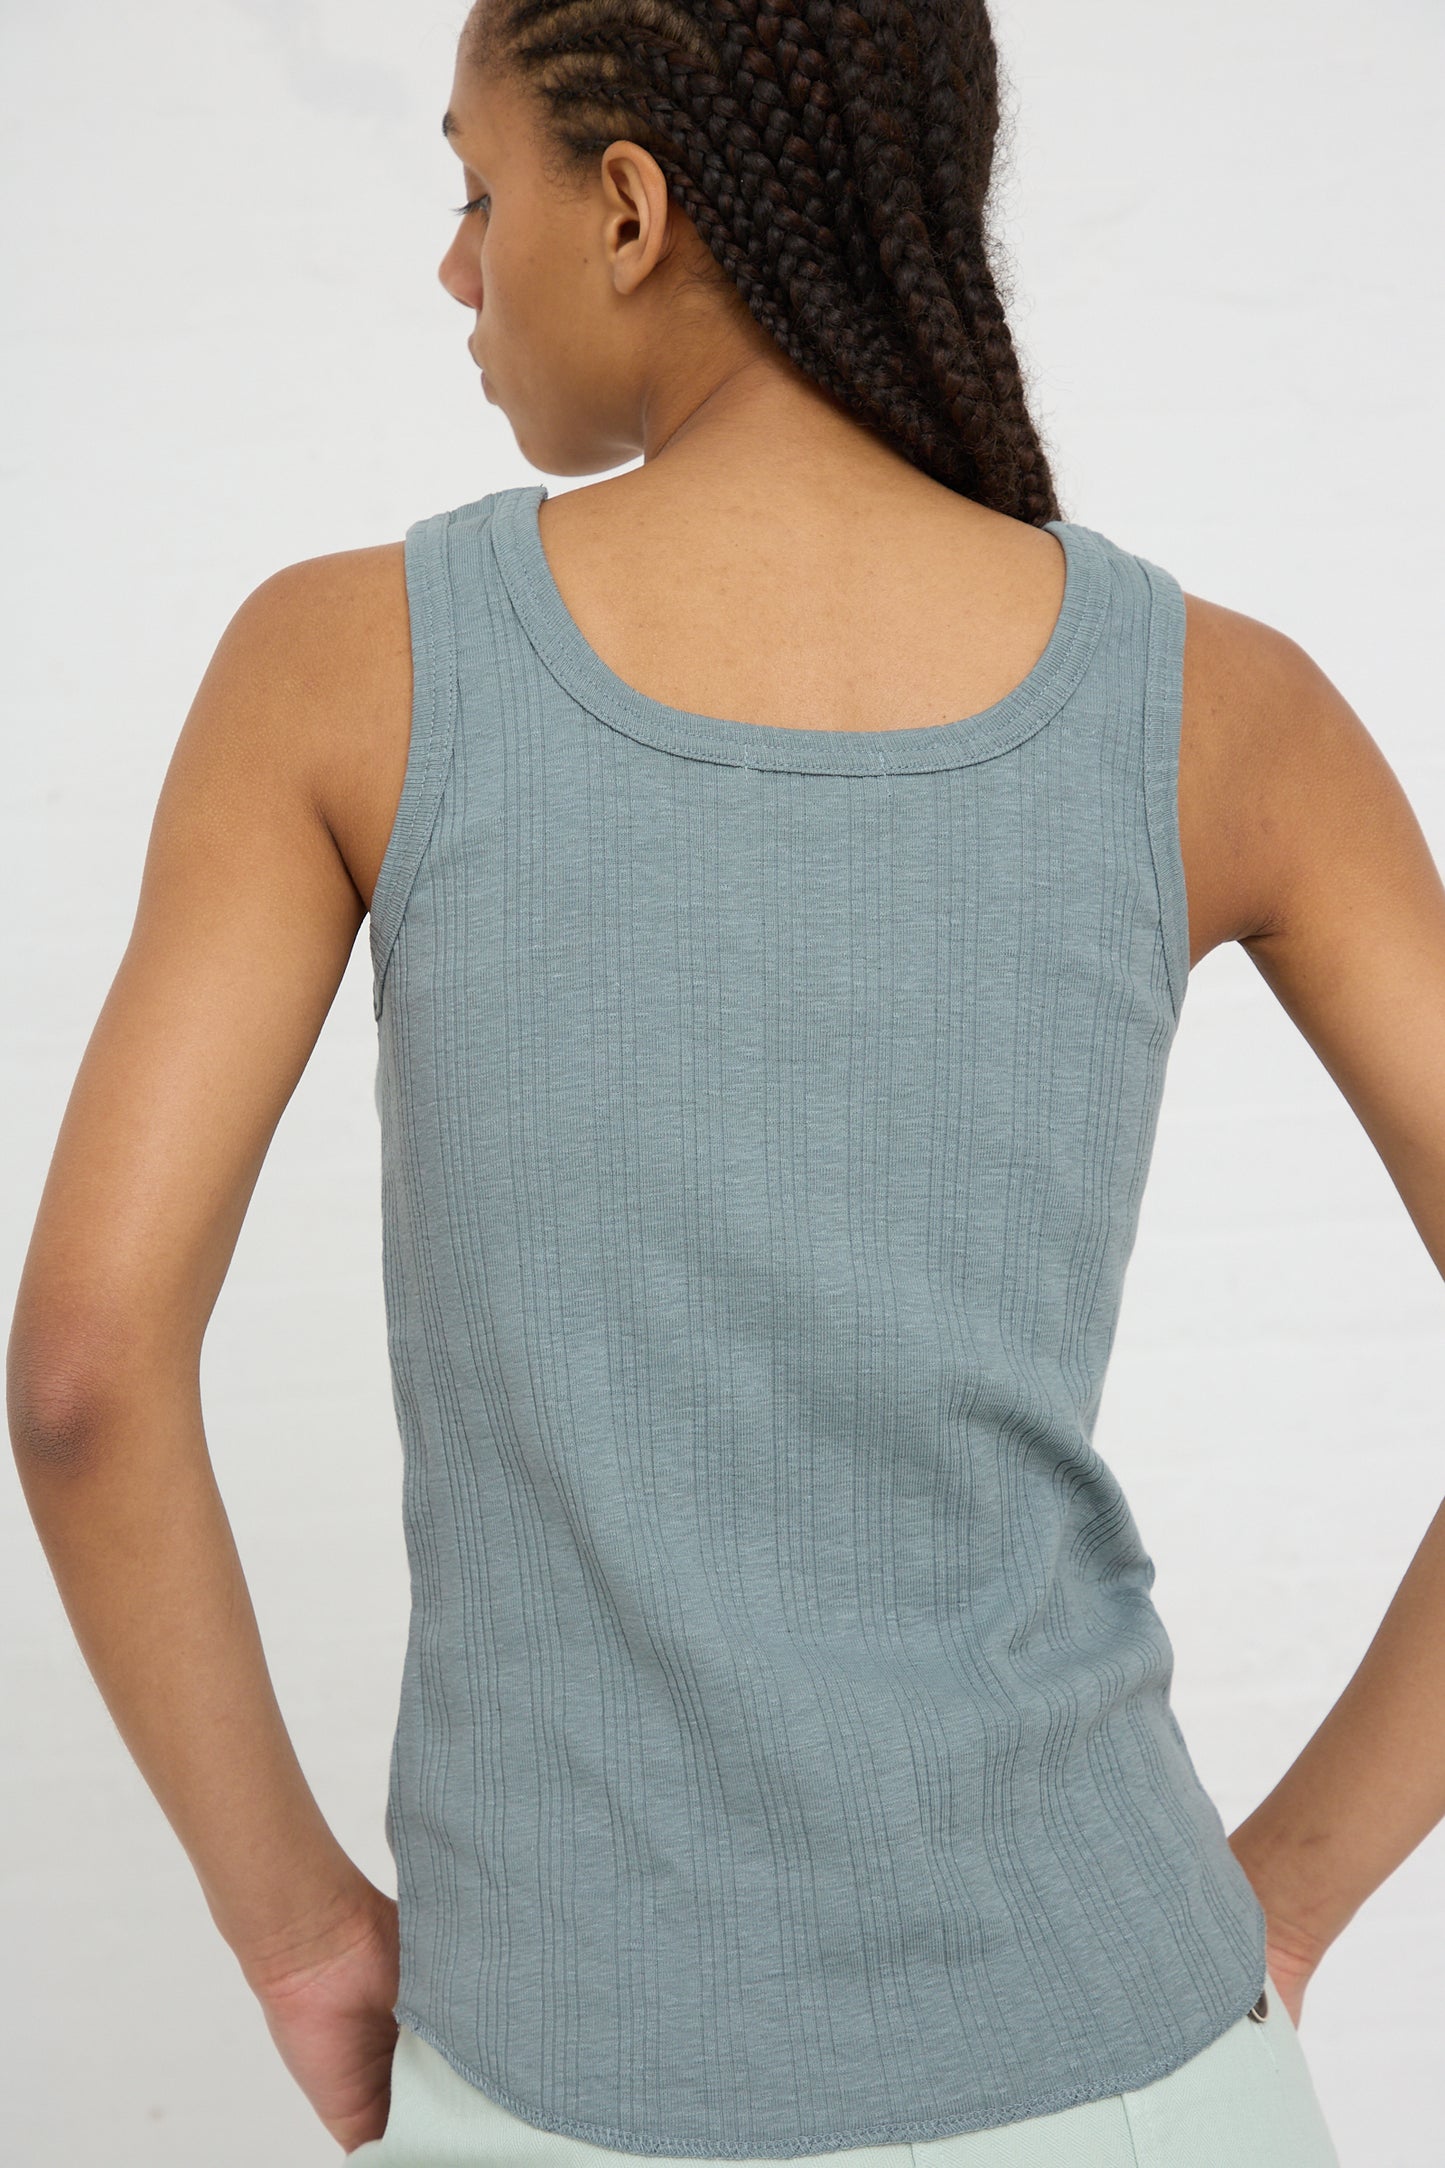 Woman wearing a Vintage Cotton Stripe Tank in Grayish Blue by Ichi Antiquités standing with her back to the camera.